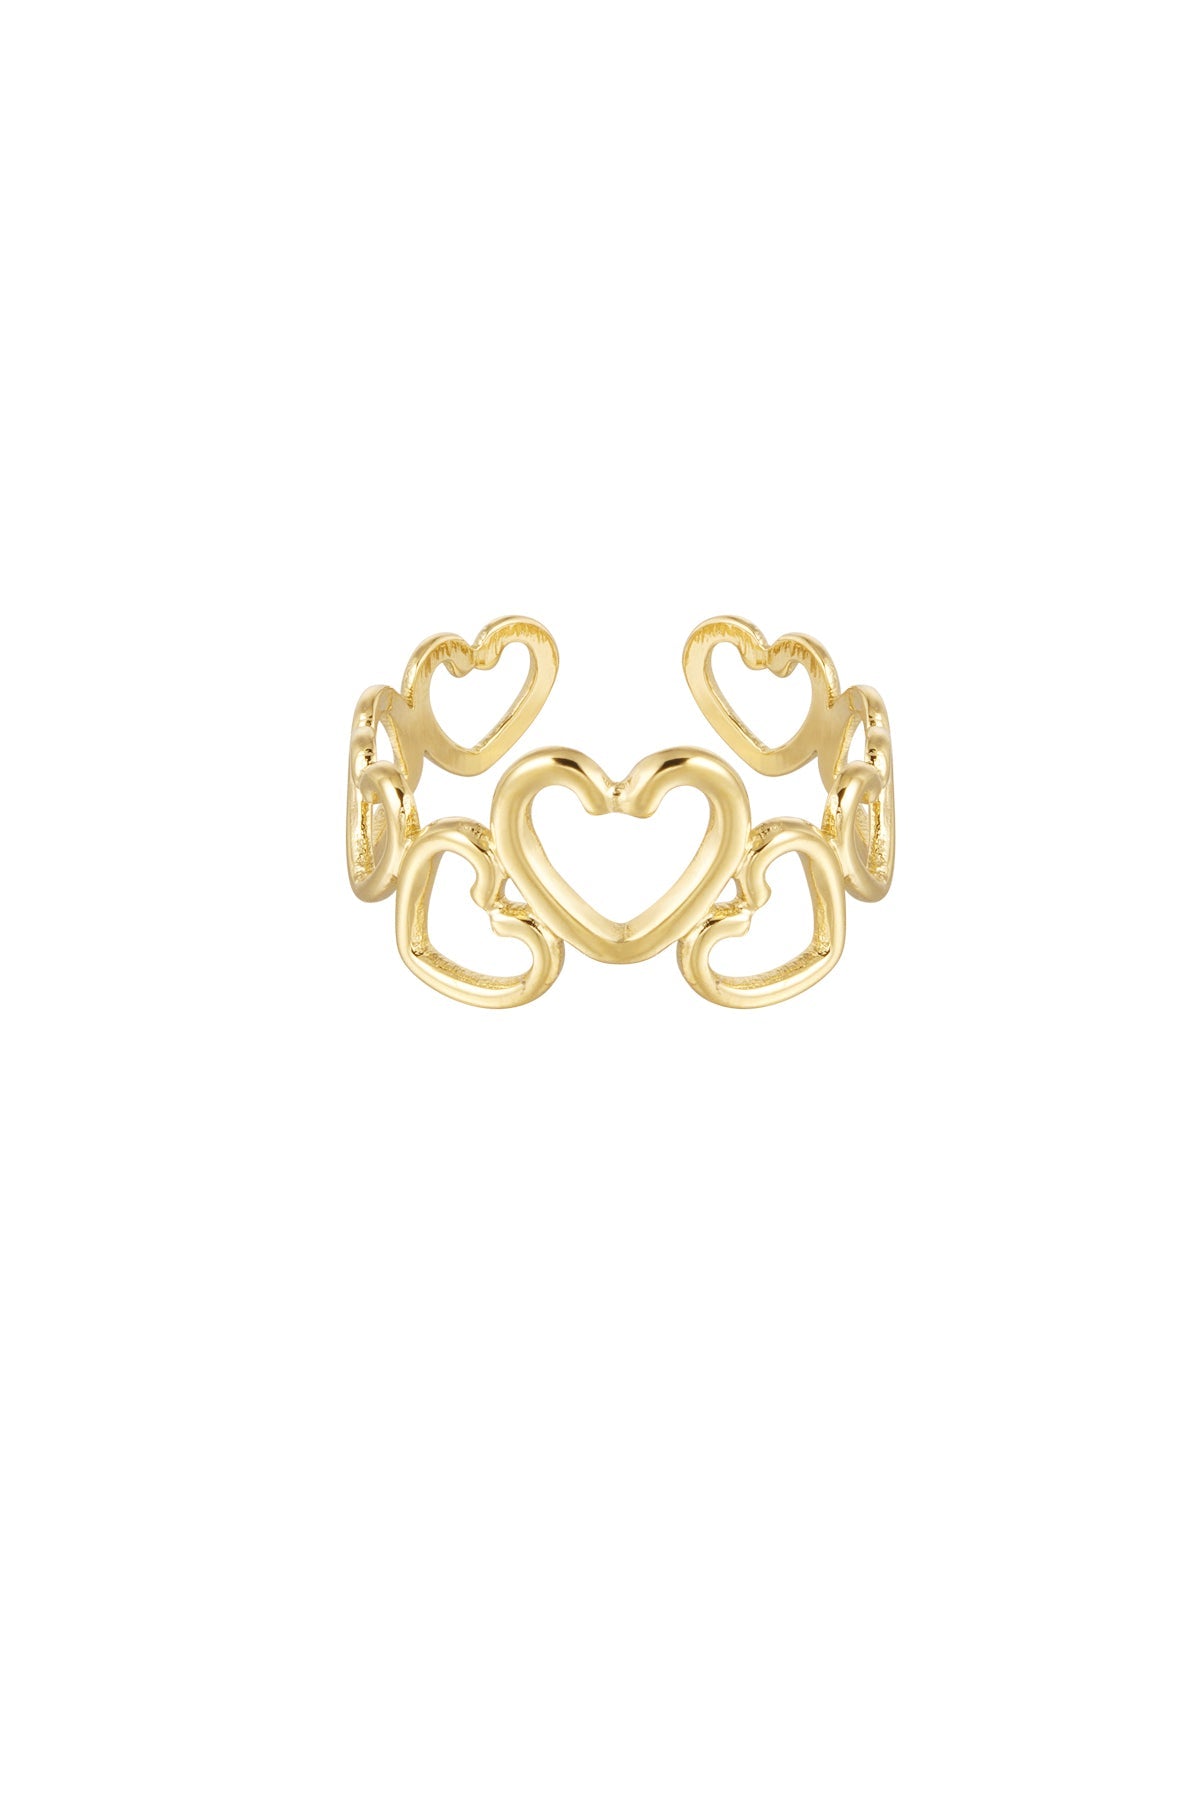 ♥︎OPEN HEARTS RING - My Favourites